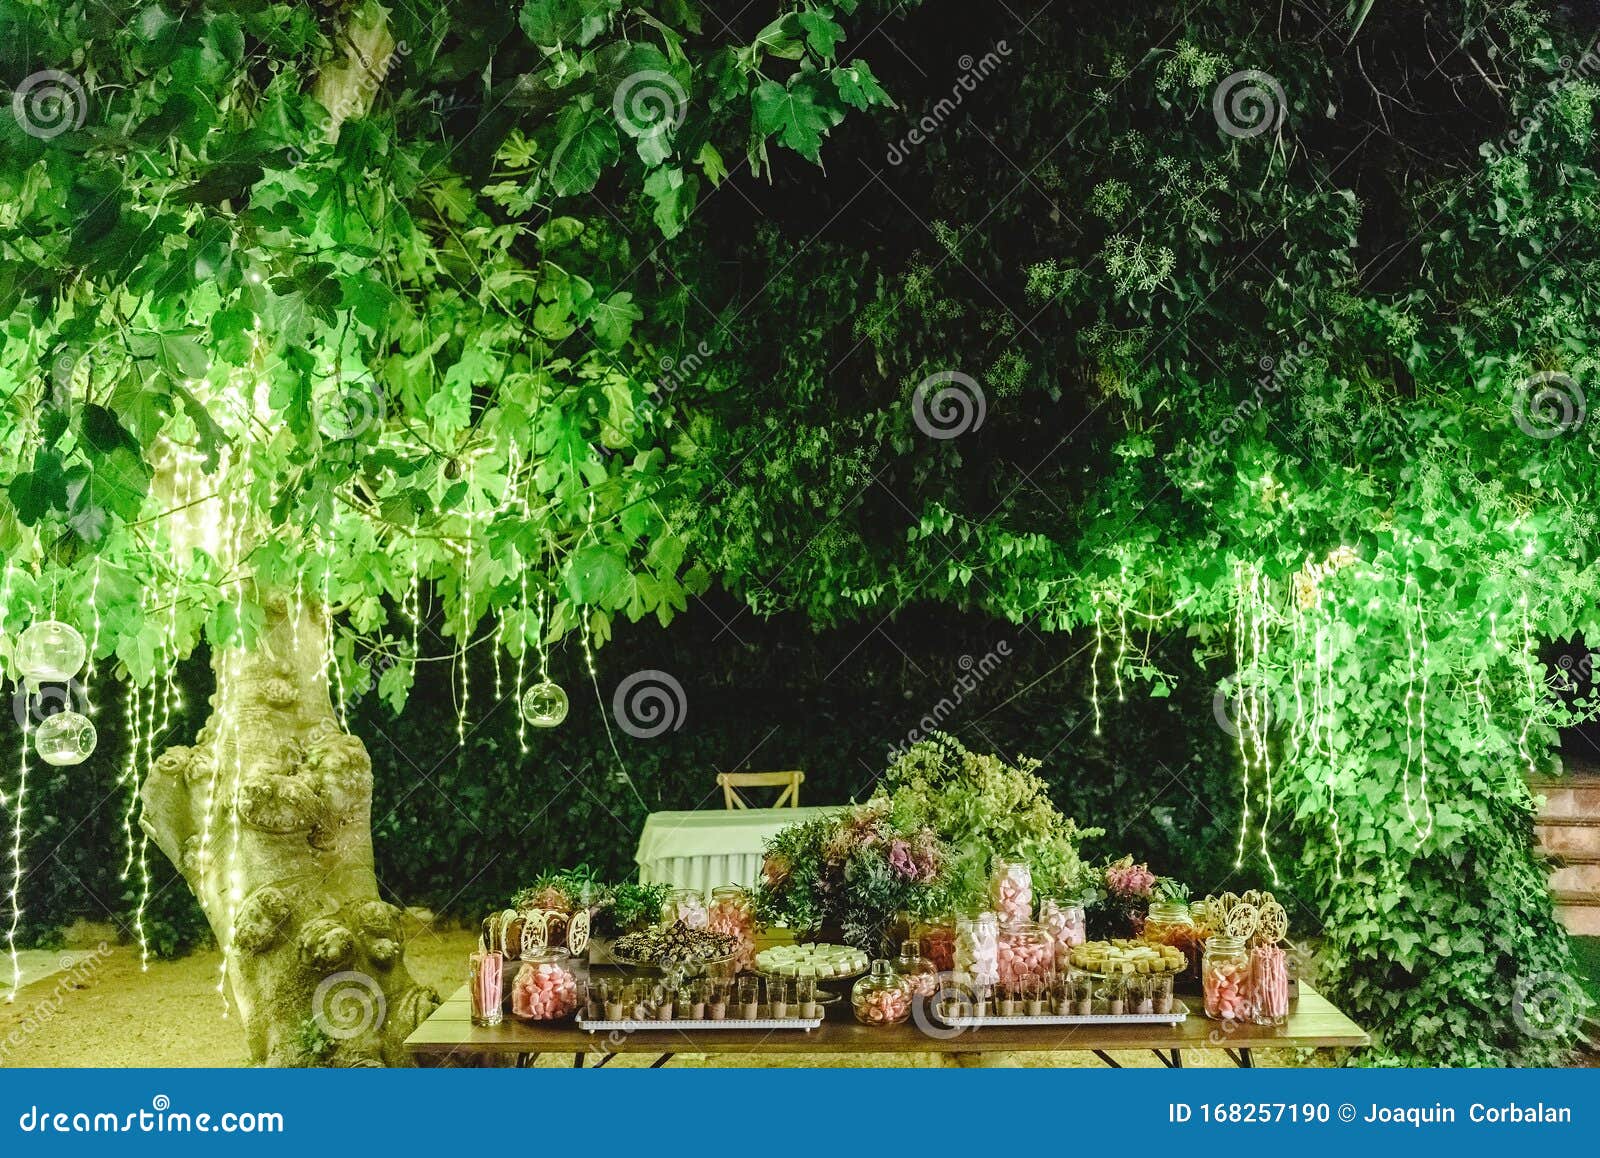 table with sweet desserts in a garden at night, illuminated by led lights